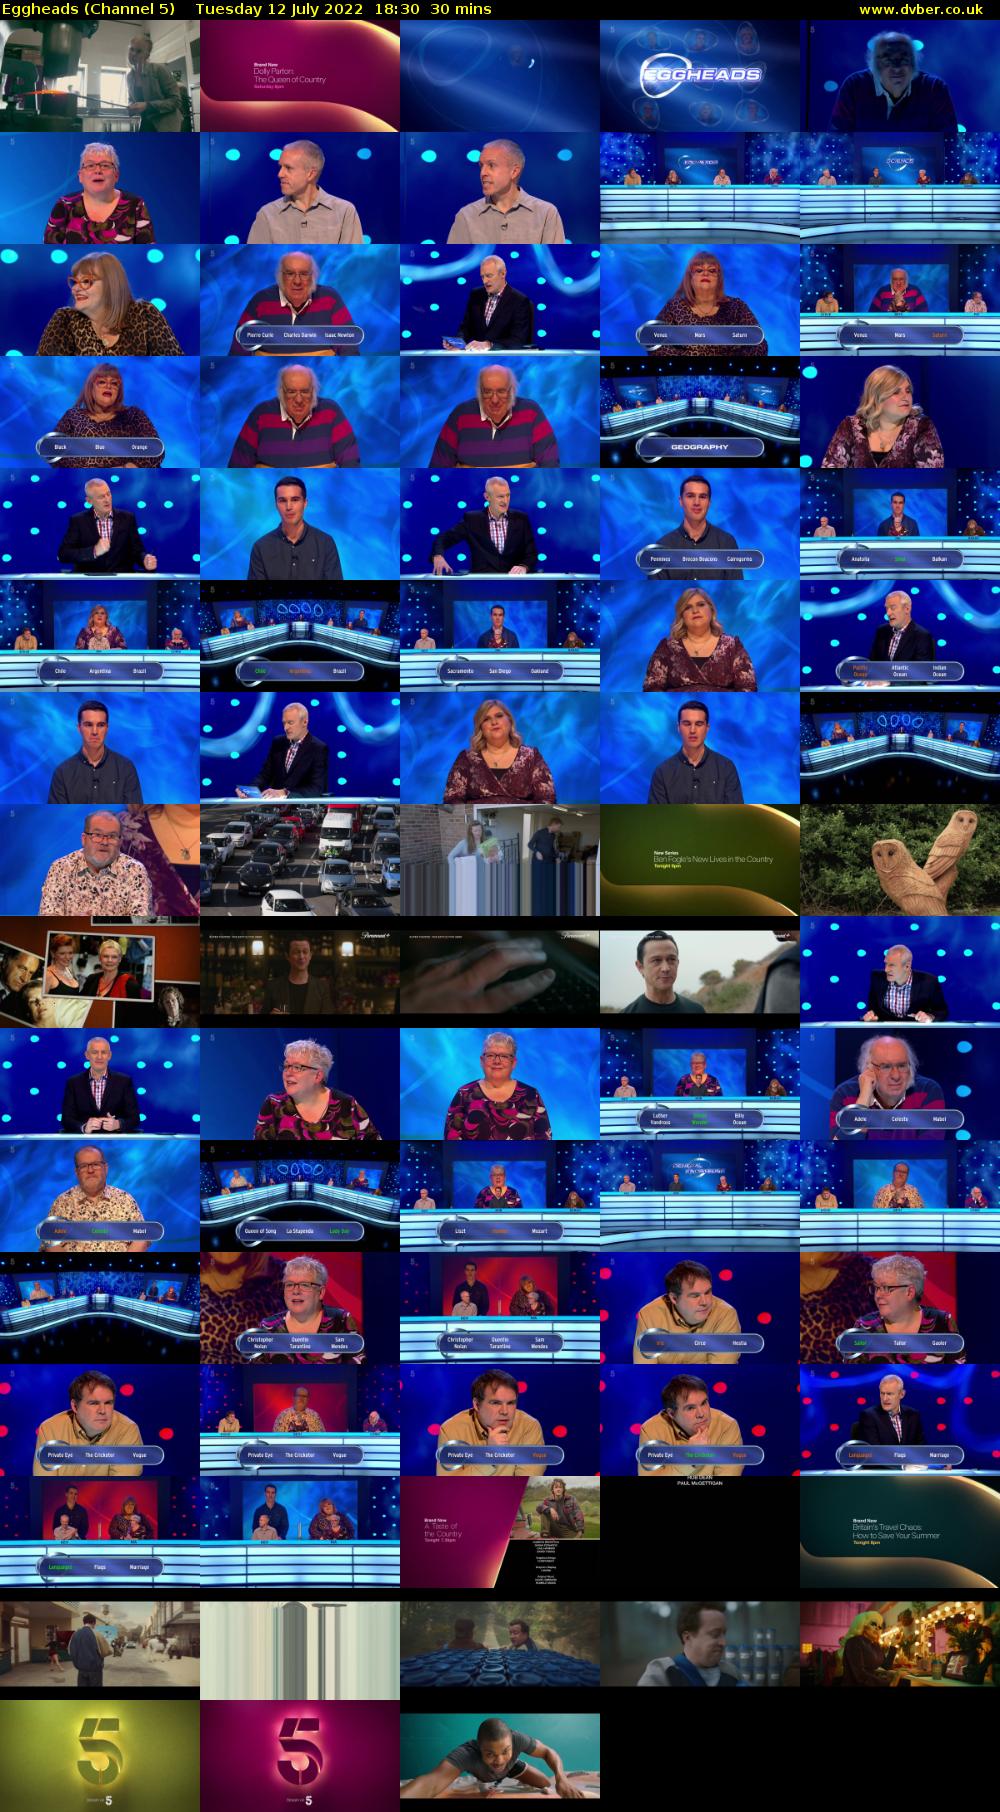 Eggheads (Channel 5) Tuesday 12 July 2022 18:30 - 19:00